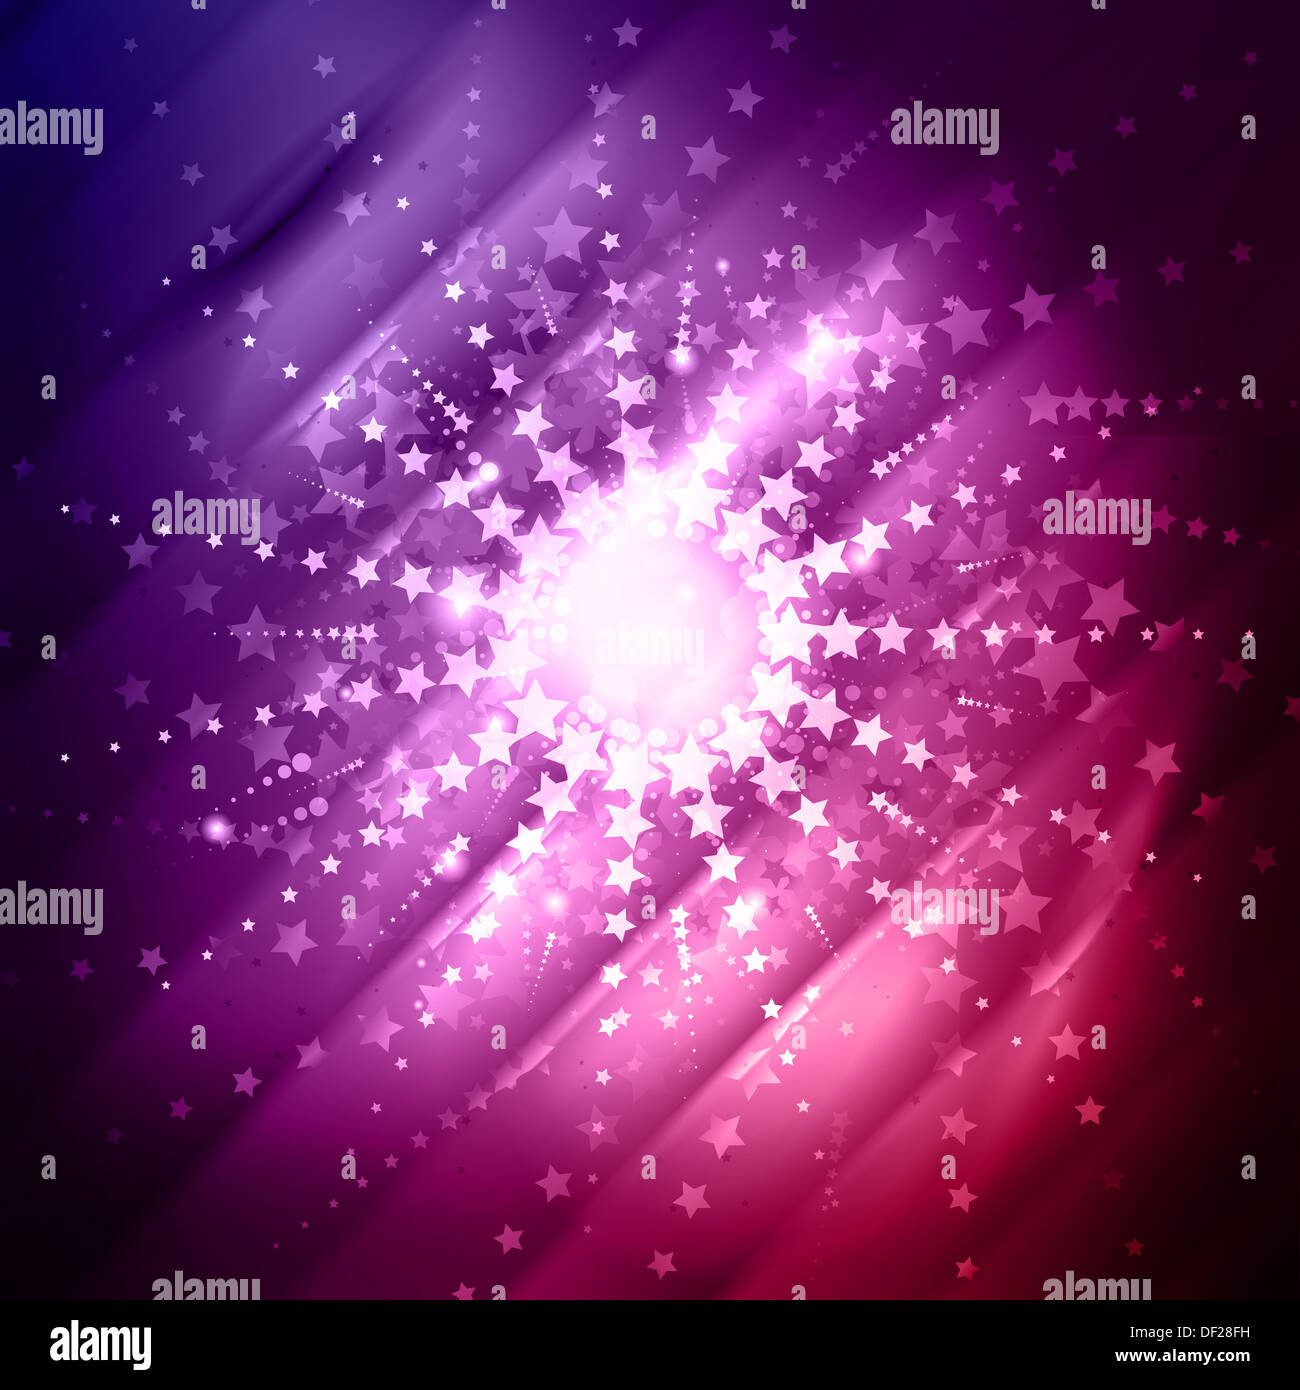 Abstract star burst background in shades of red and purple Stock Photo